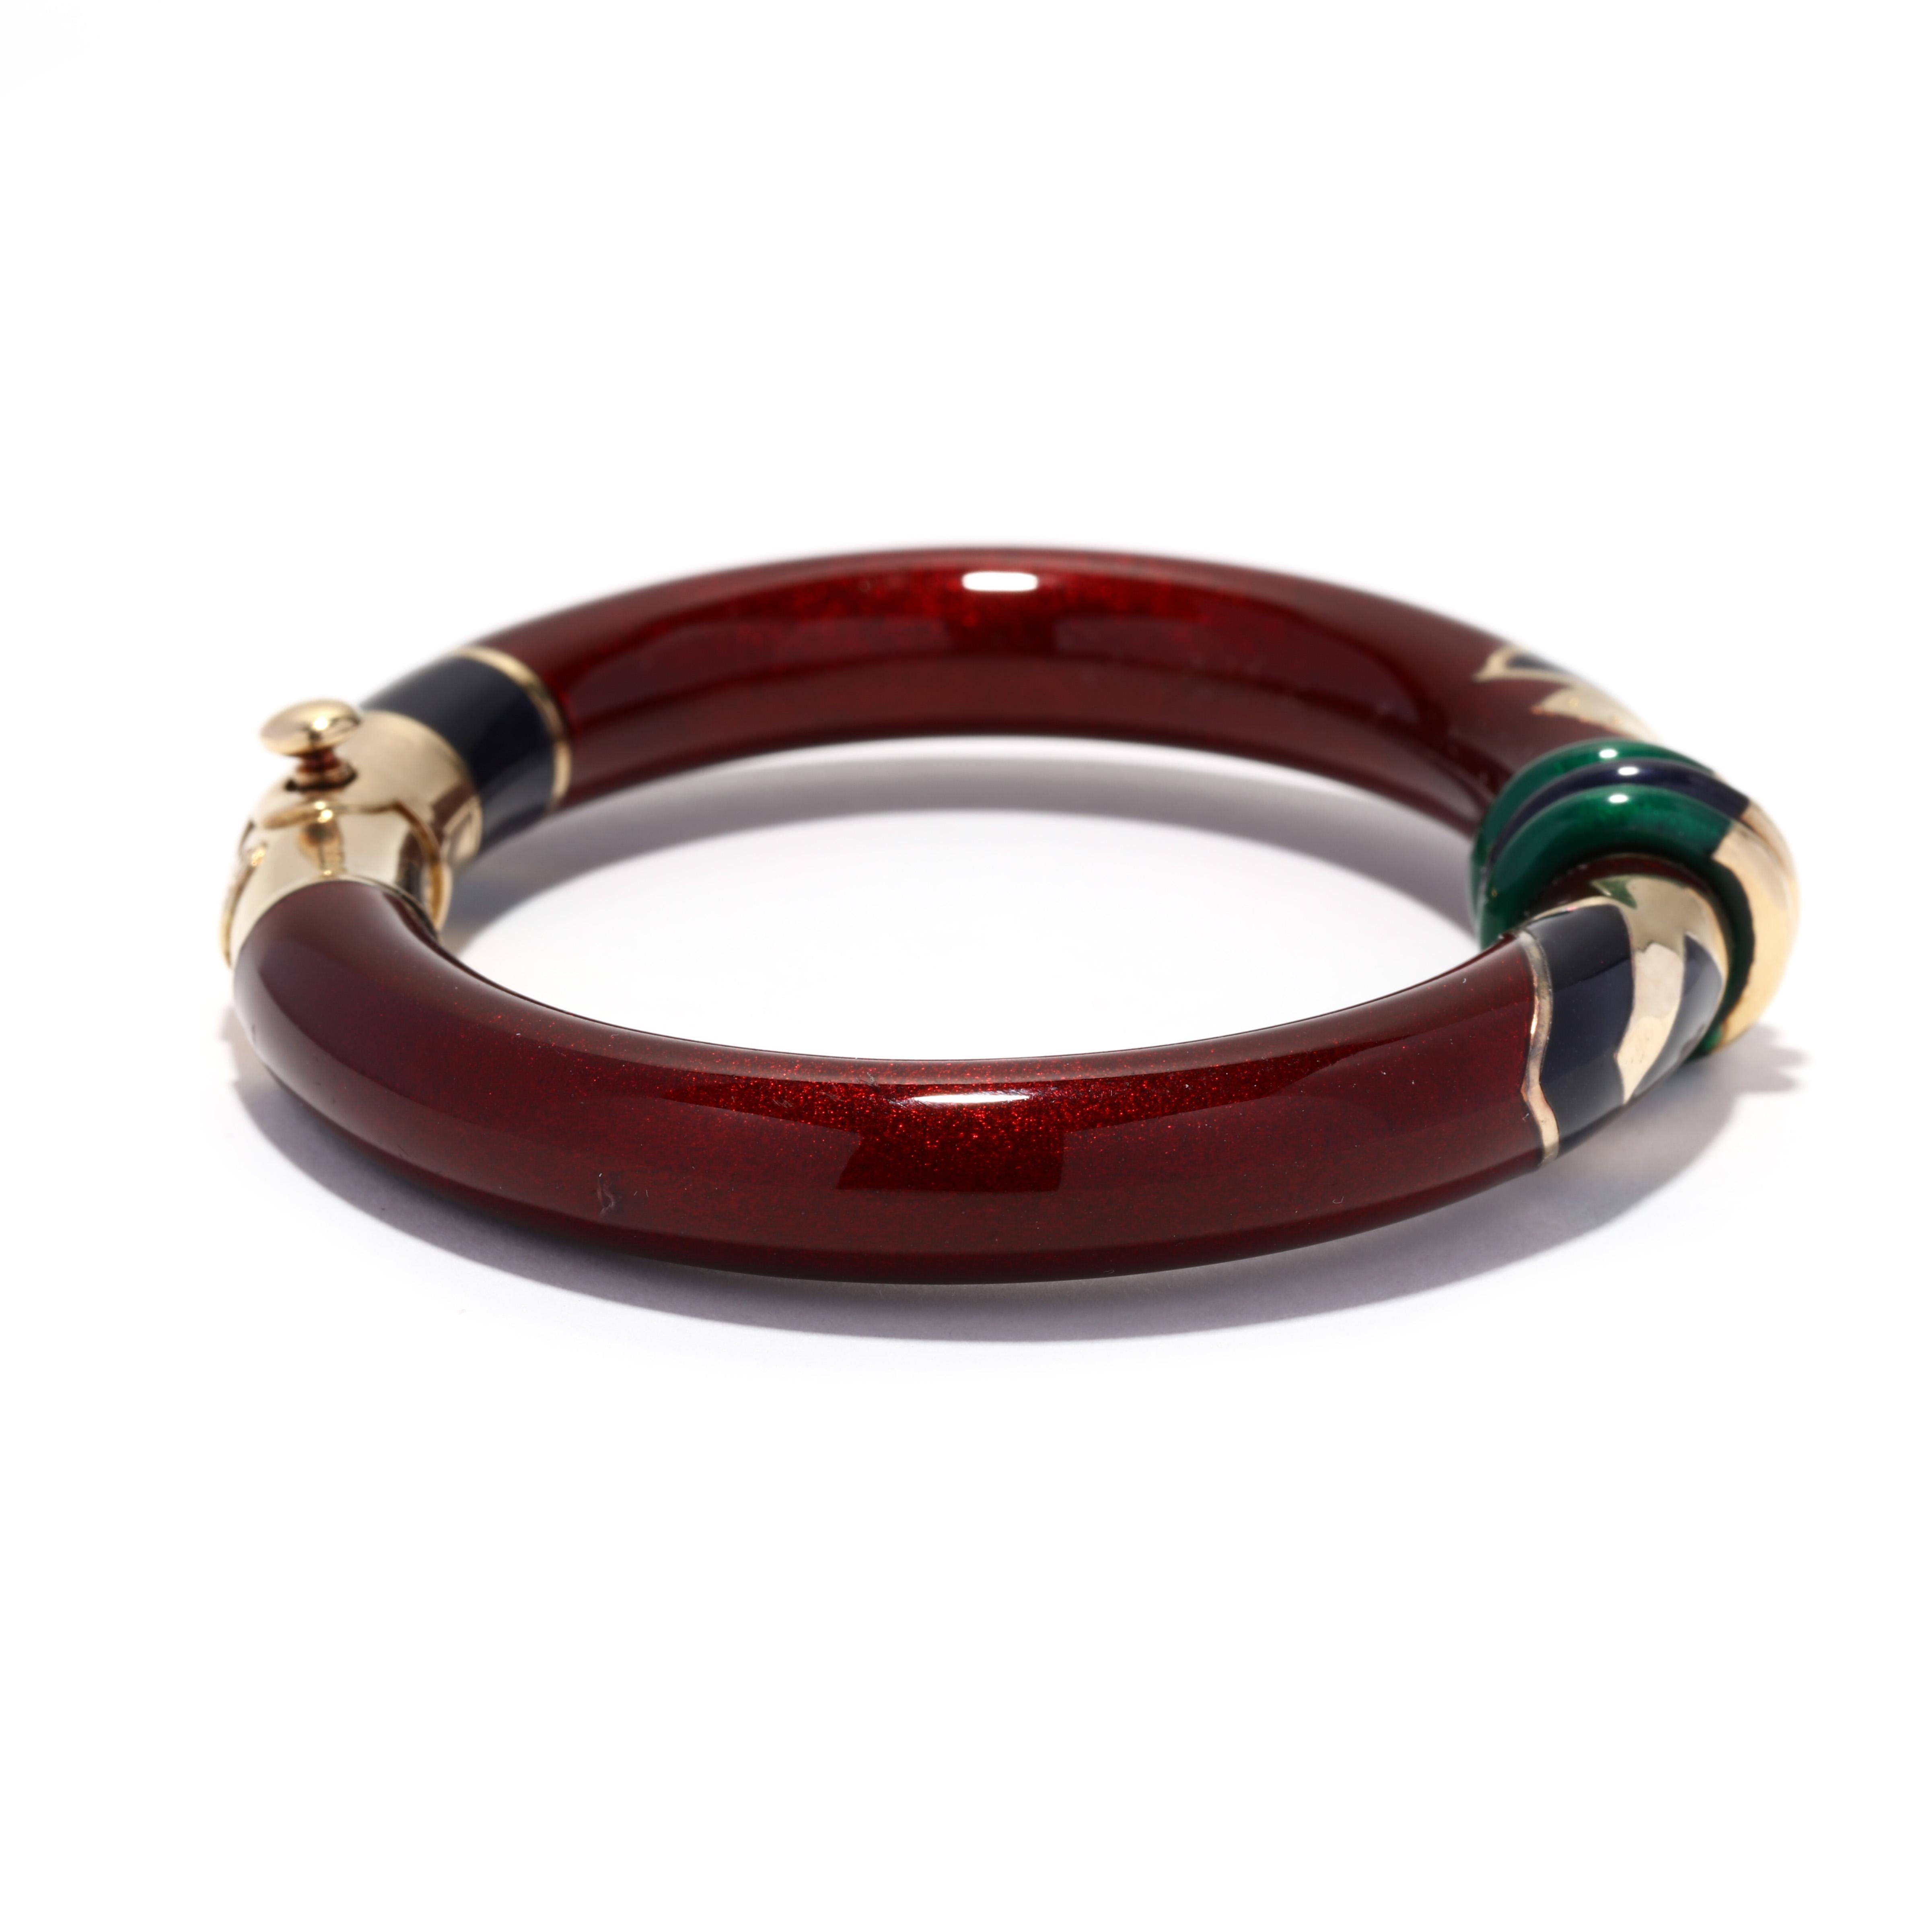 A vintage 18 karat yellow gold, sterling silver, red, green and black enamel bangle bracelet designed by La Nouvelle Bague. This bangle features a red enamel tube with black and green geometric designs and with three enamel rondel beads in the